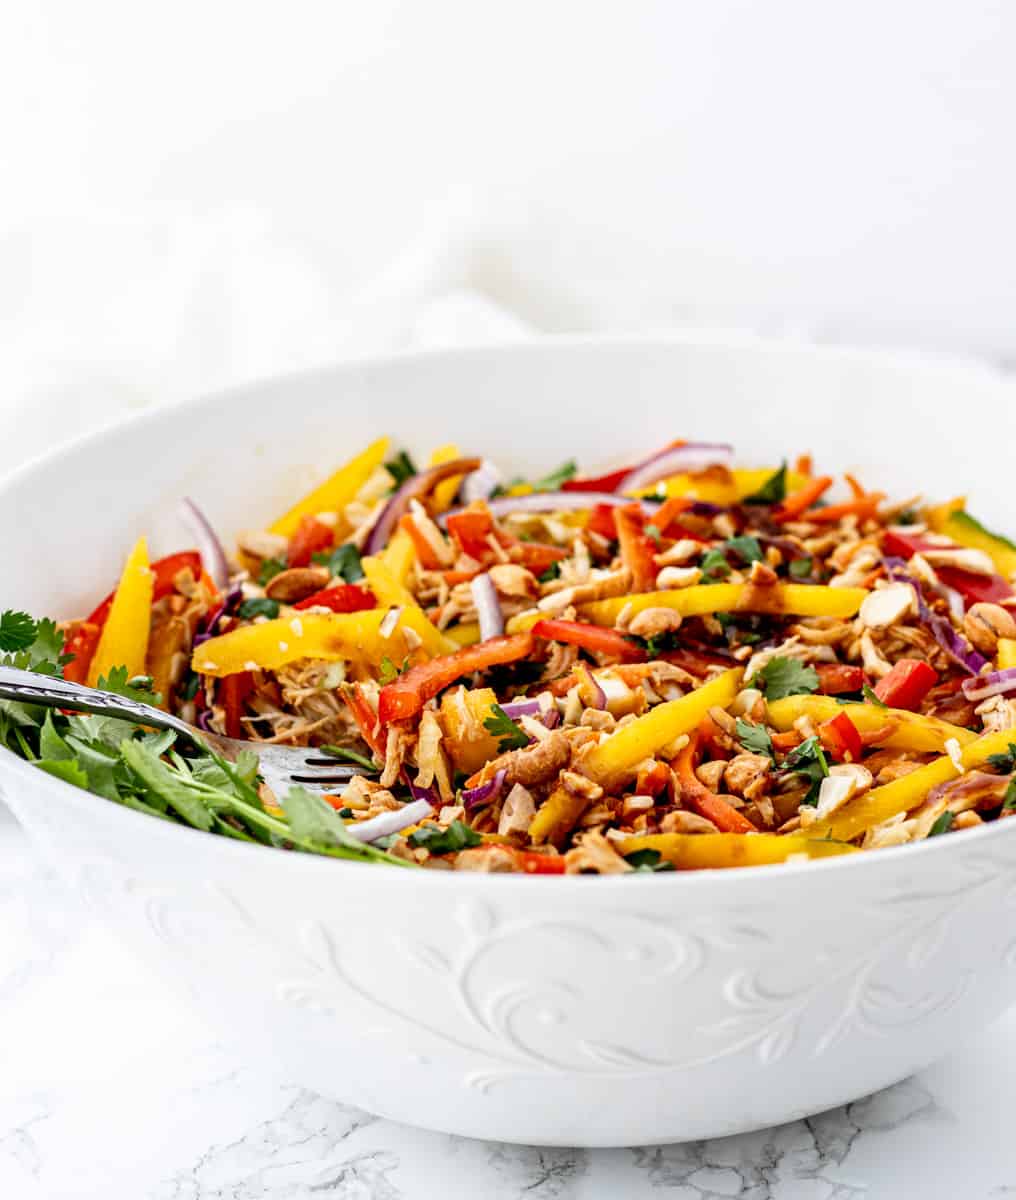 Side view of the Thai mango salad in a white bowl.